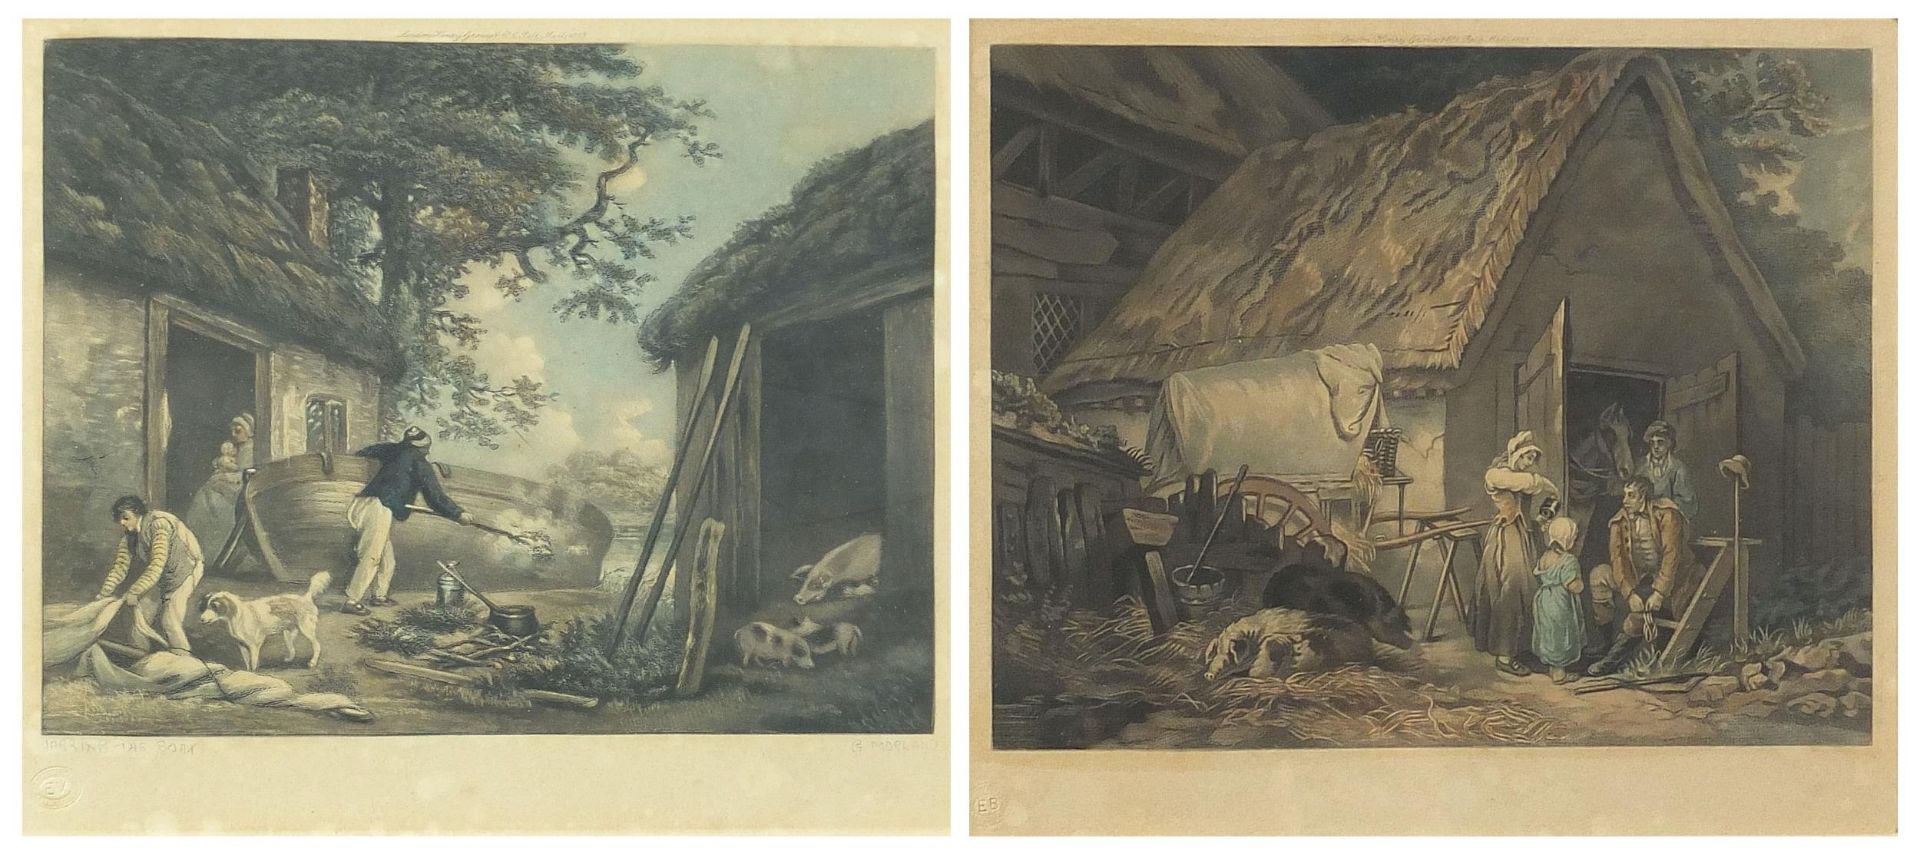 George Morland - Tarring the boat and figures before a barn, pair of prints in colour, one pencil